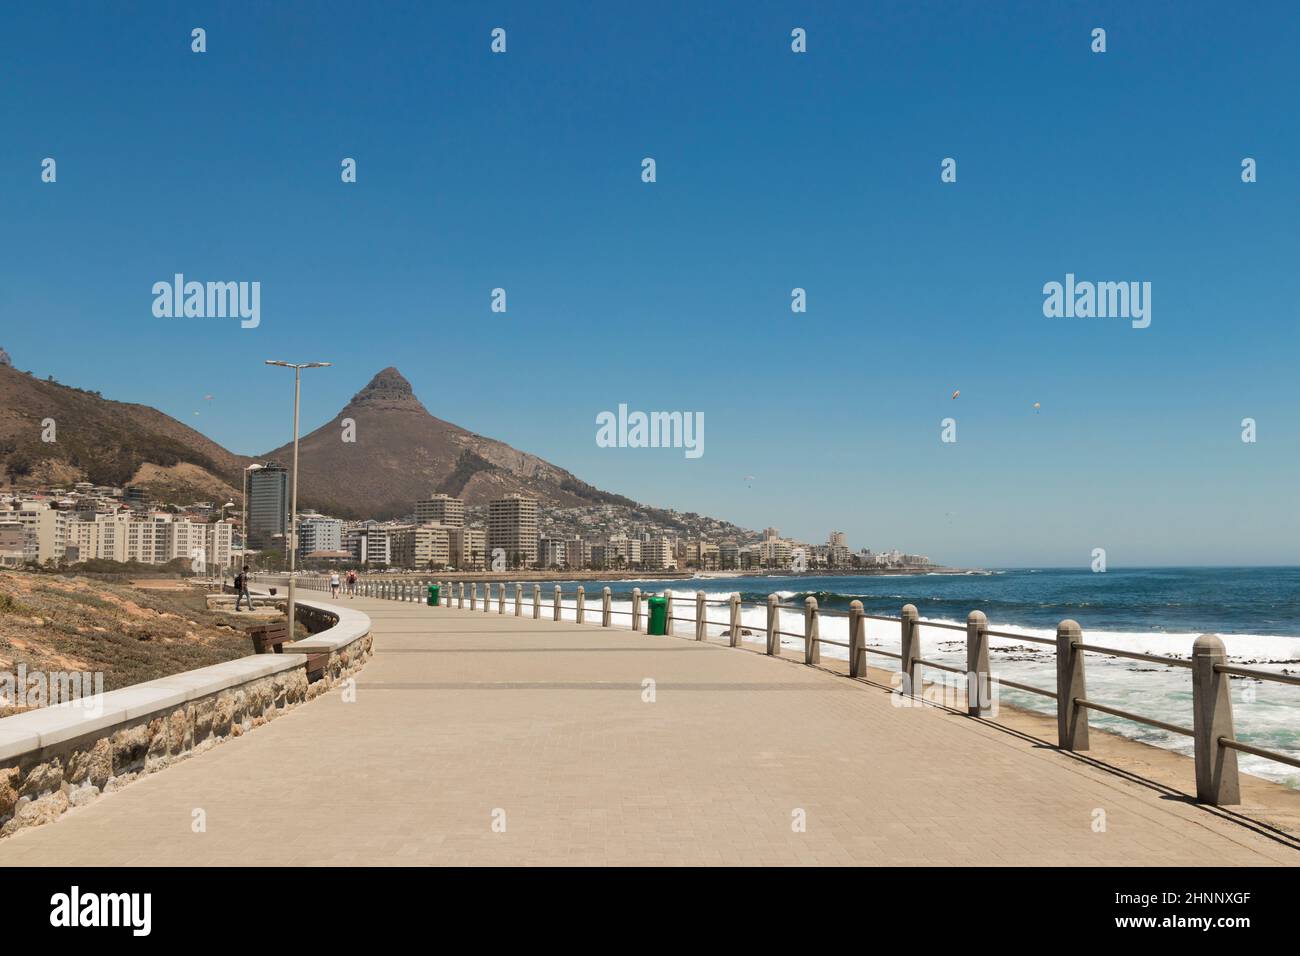 Mountains, hotels Sea Point, beach promenade Cape Town South Africa. Stock Photo